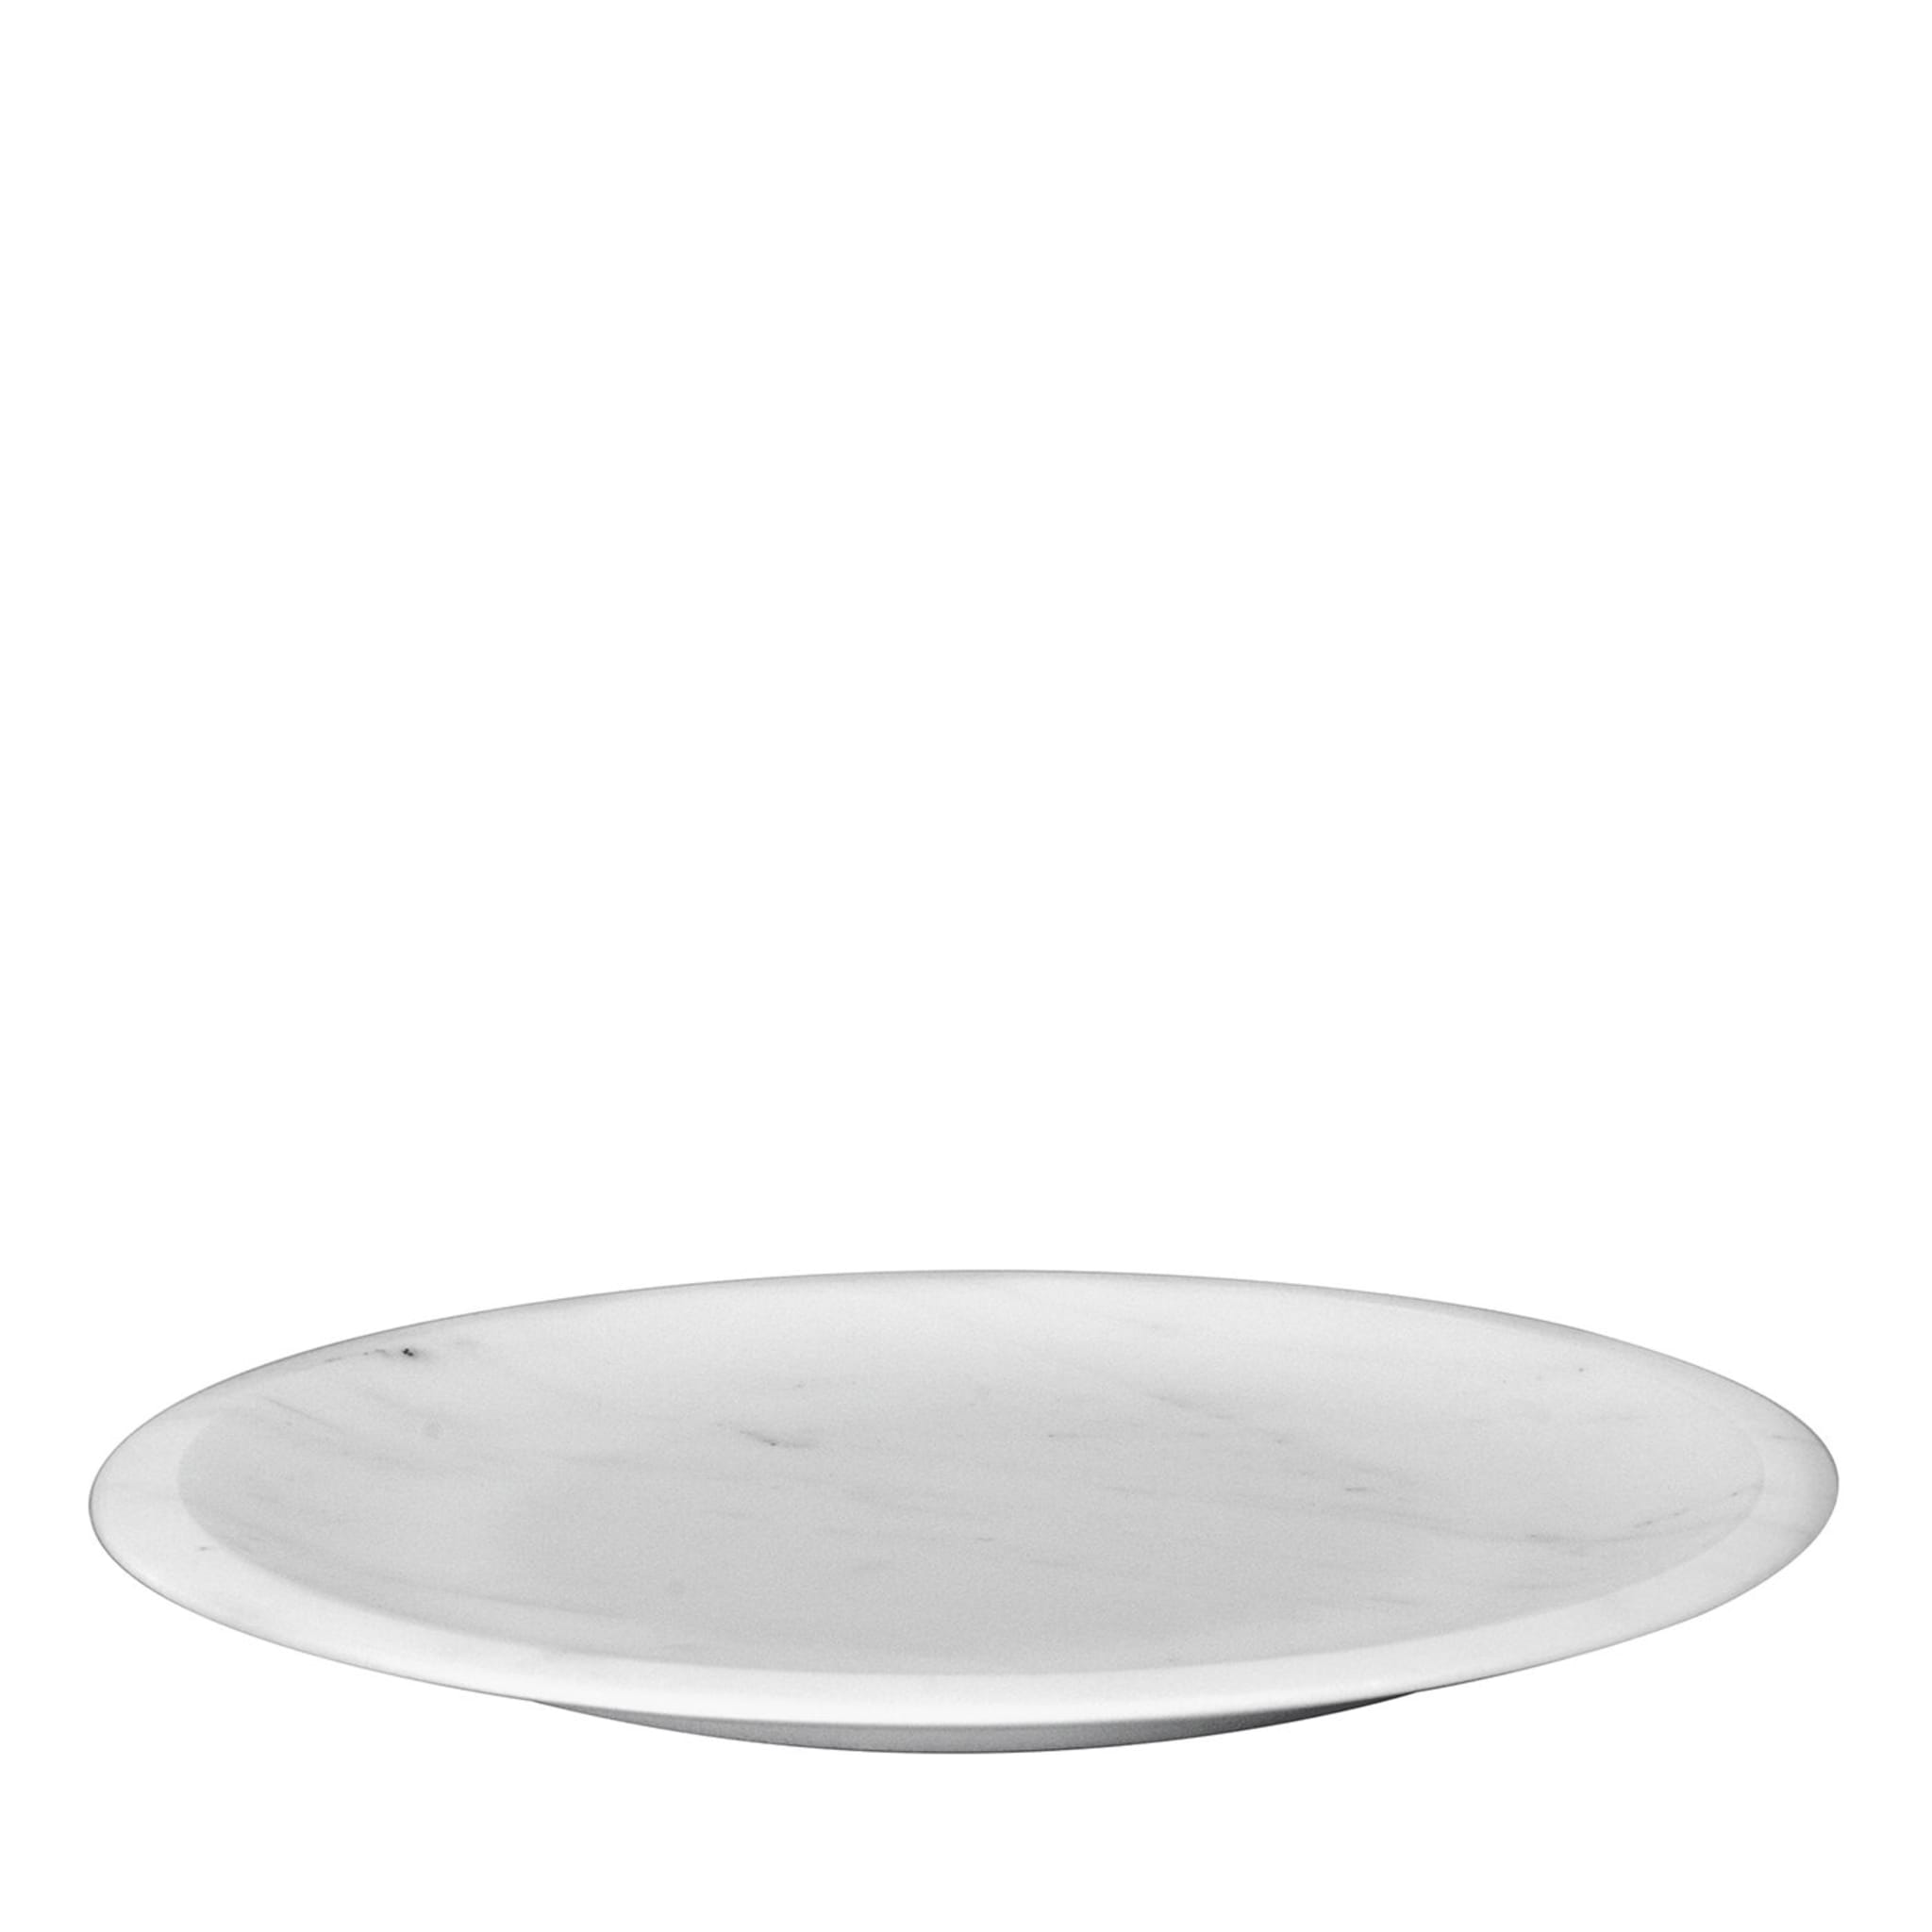 White Michelangelo Dinner Plate by Ivan Colominas - Main view